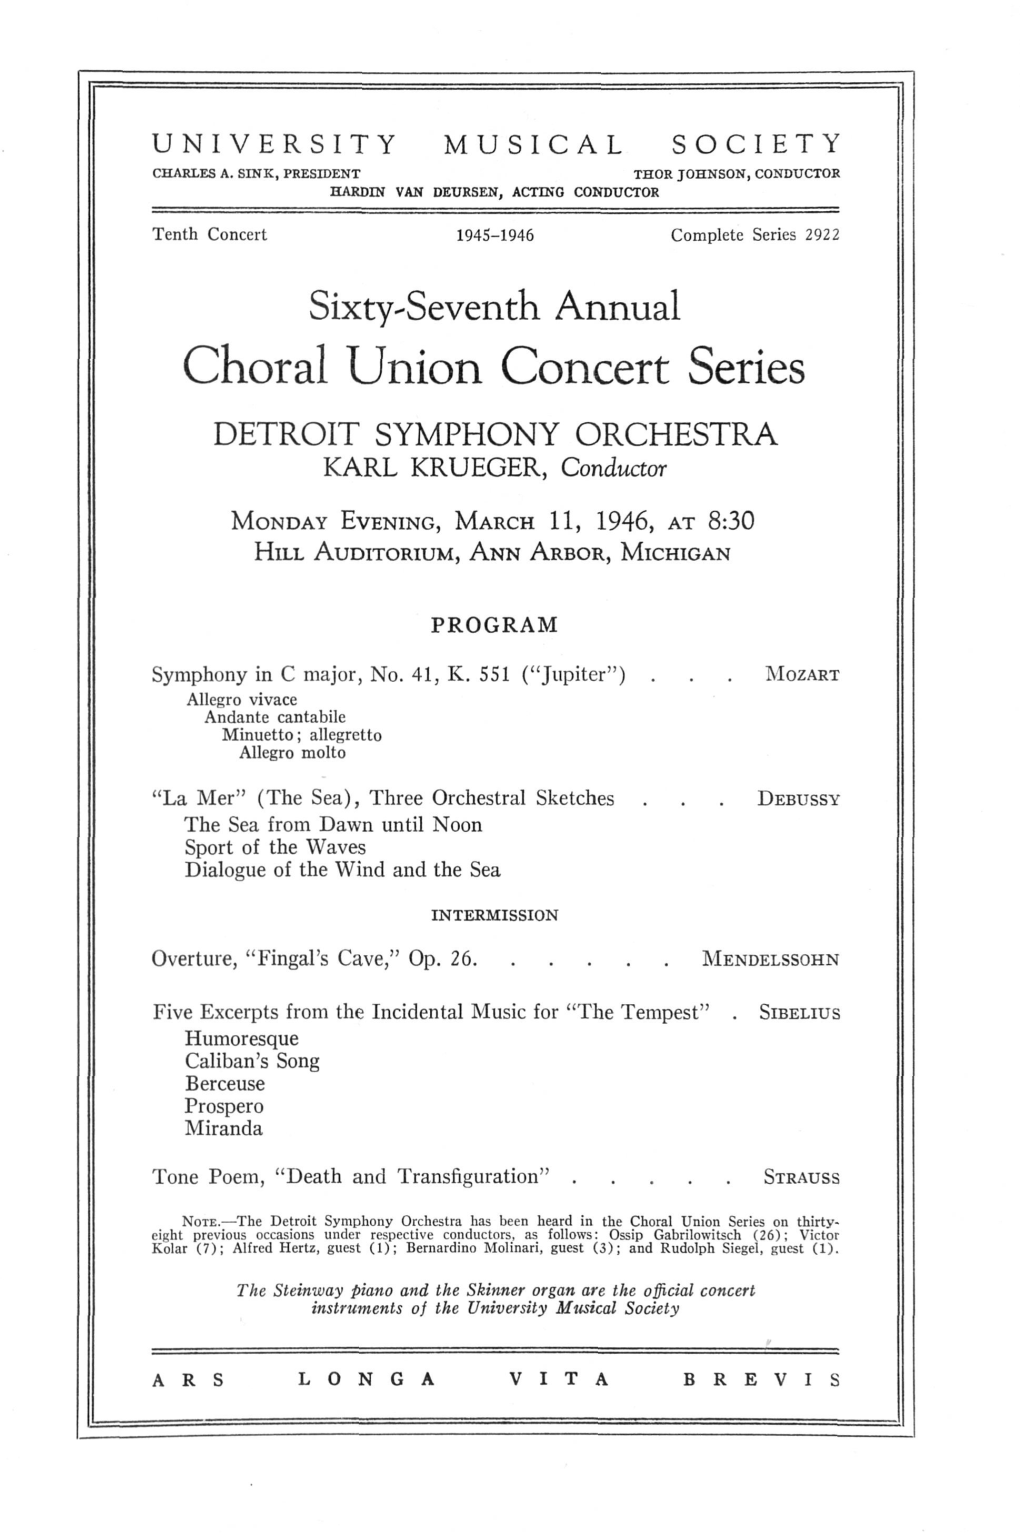 Choral Union Concert Series DETROIT SYMPHONY ORCHESTRA KARL KRUEGER, Conductor